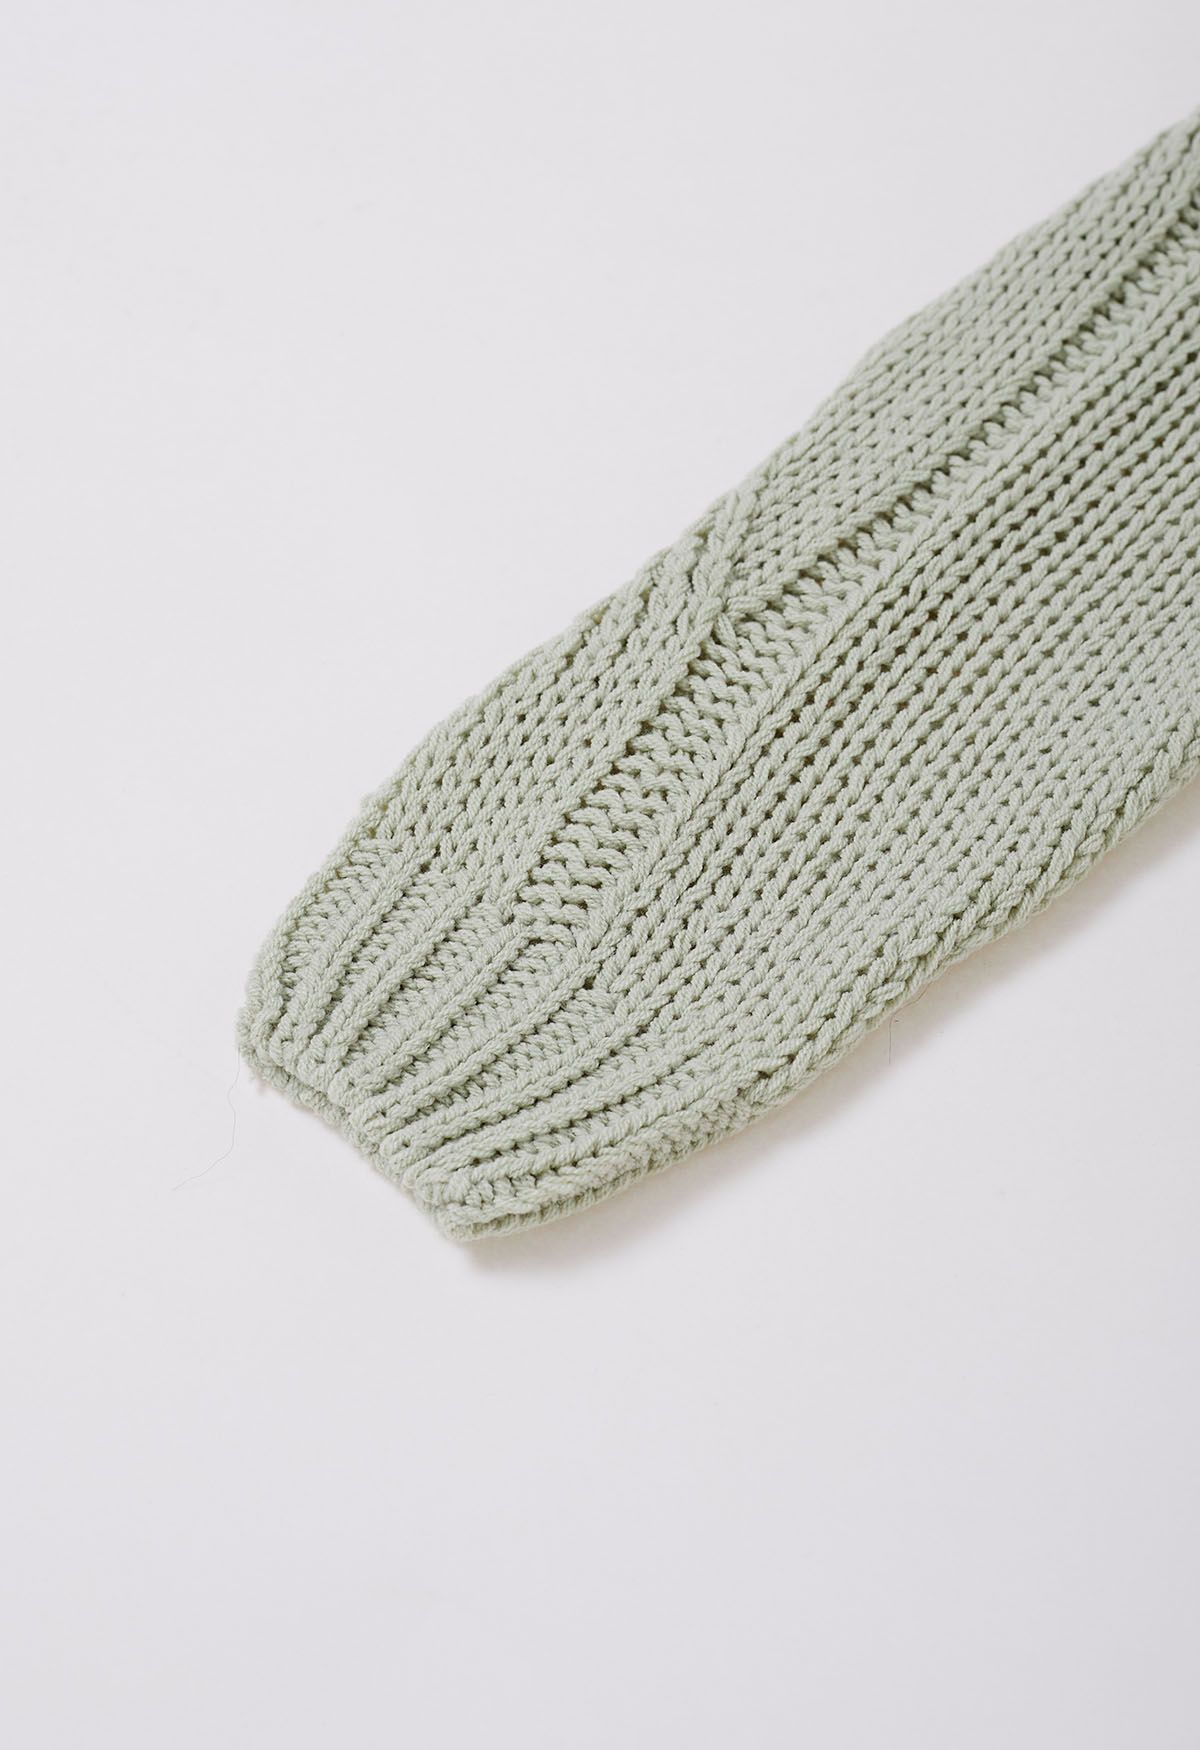 Casual Elegance Cable Knit Sweater in Pea Green